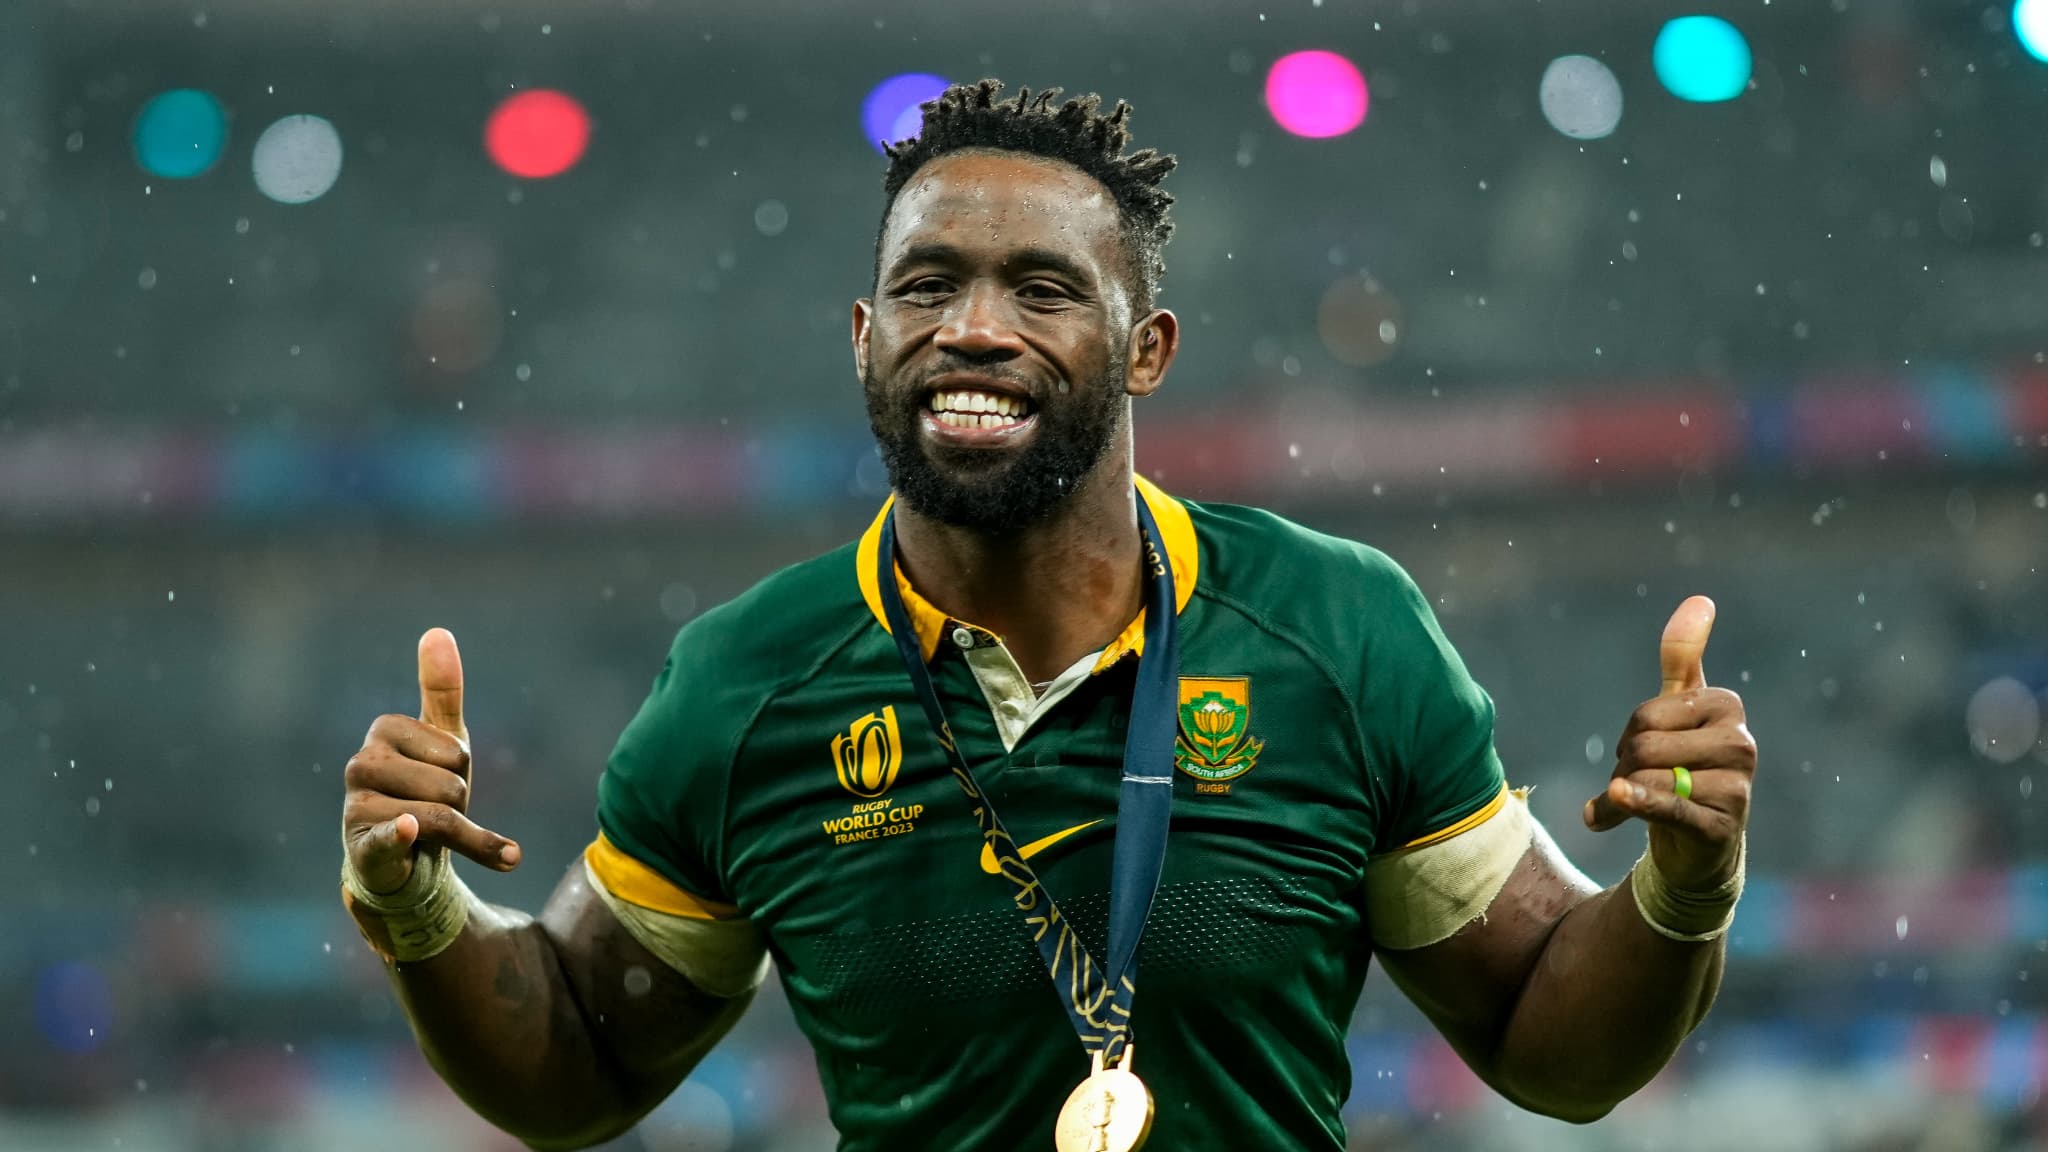 After the coronation, Kolisi and Nienaber praised the support of the entire country